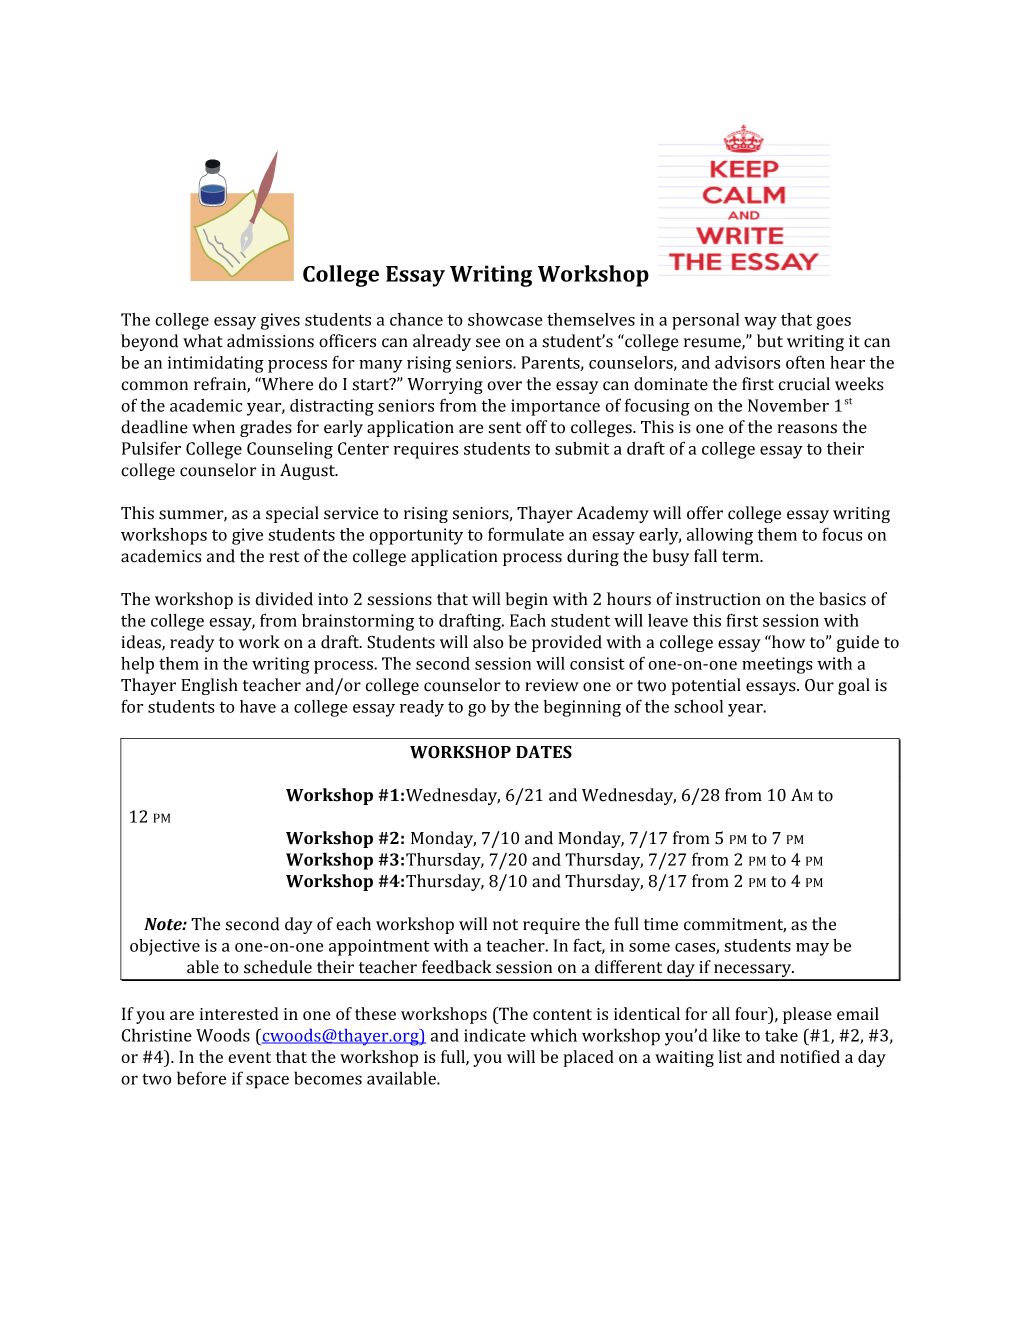 College Essay Writing Workshop - Writing a College